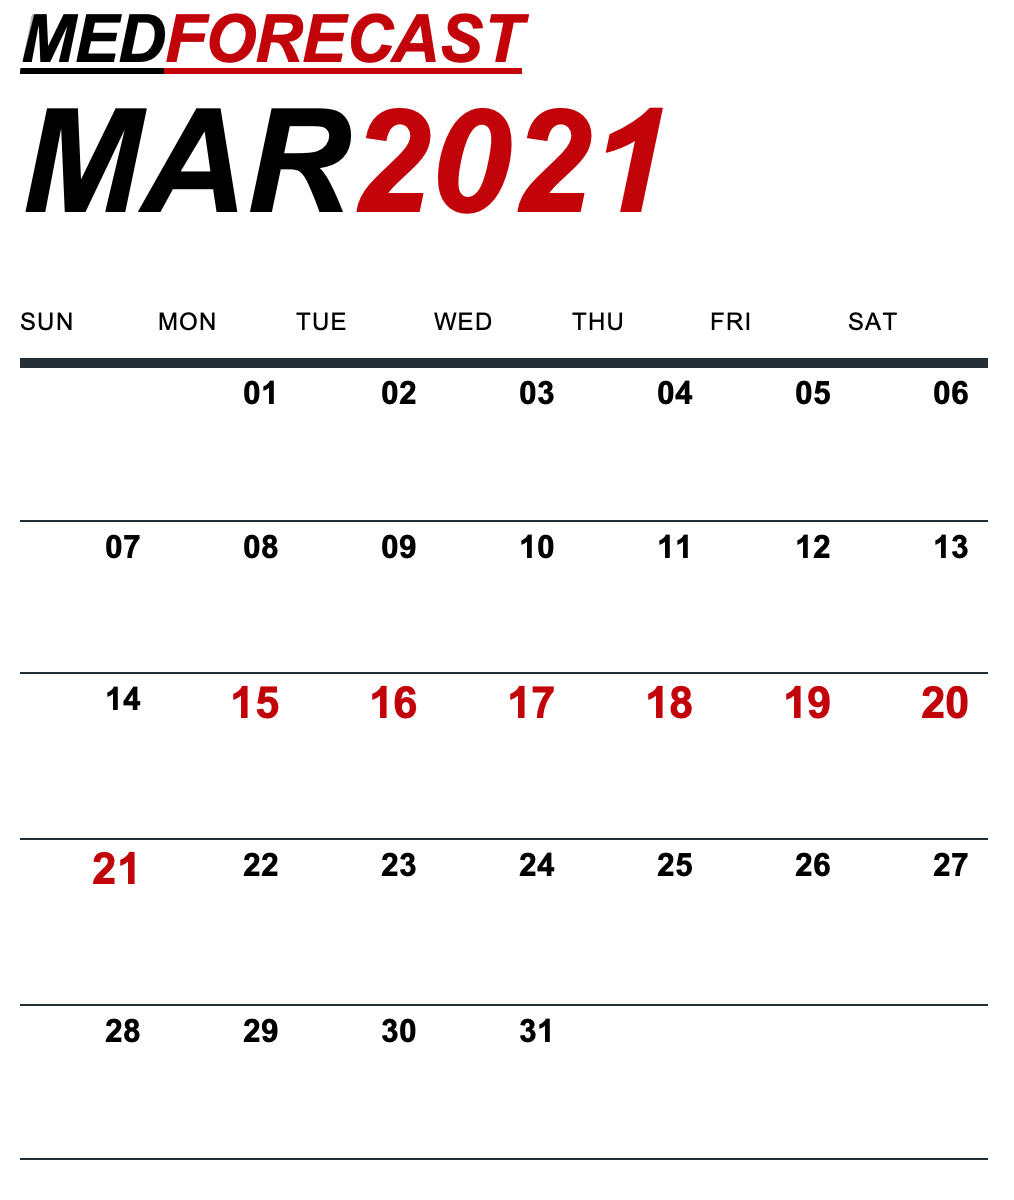 Medical News Forecast for March 15-21